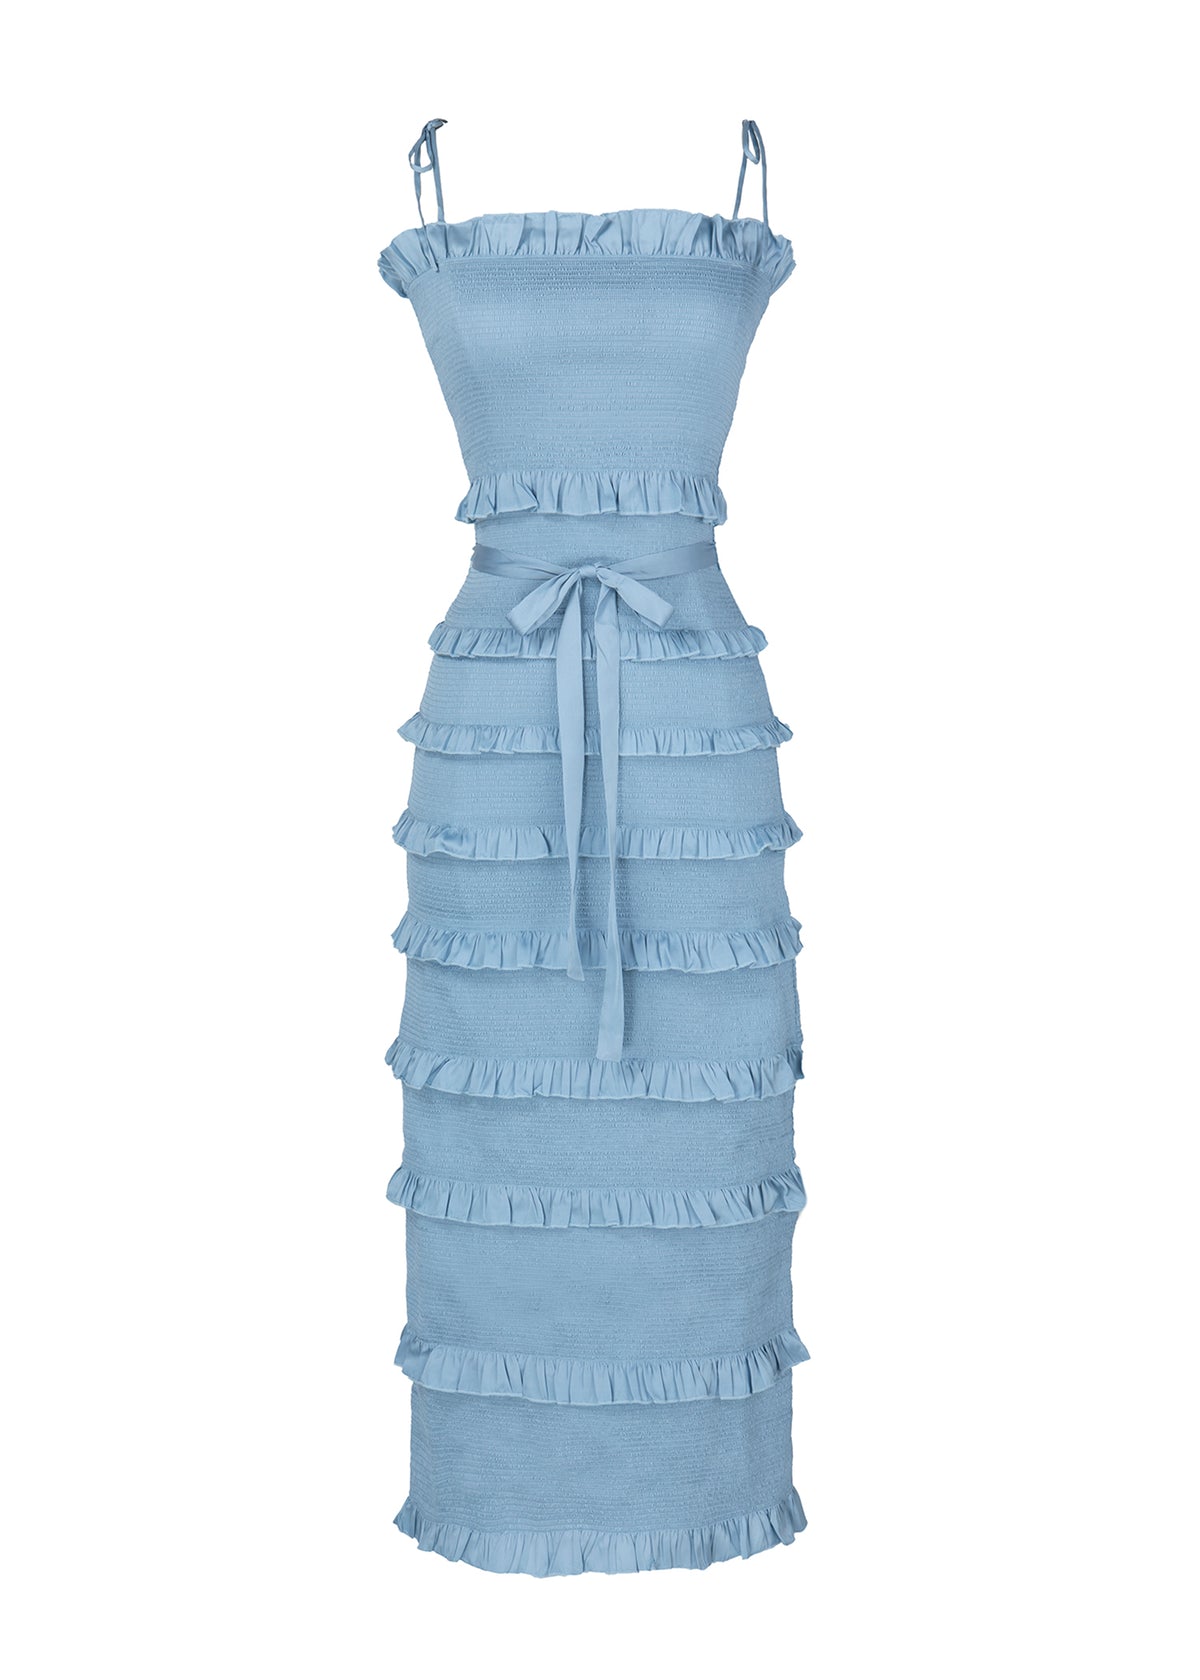 The Lily Dress in Cashmere Blue